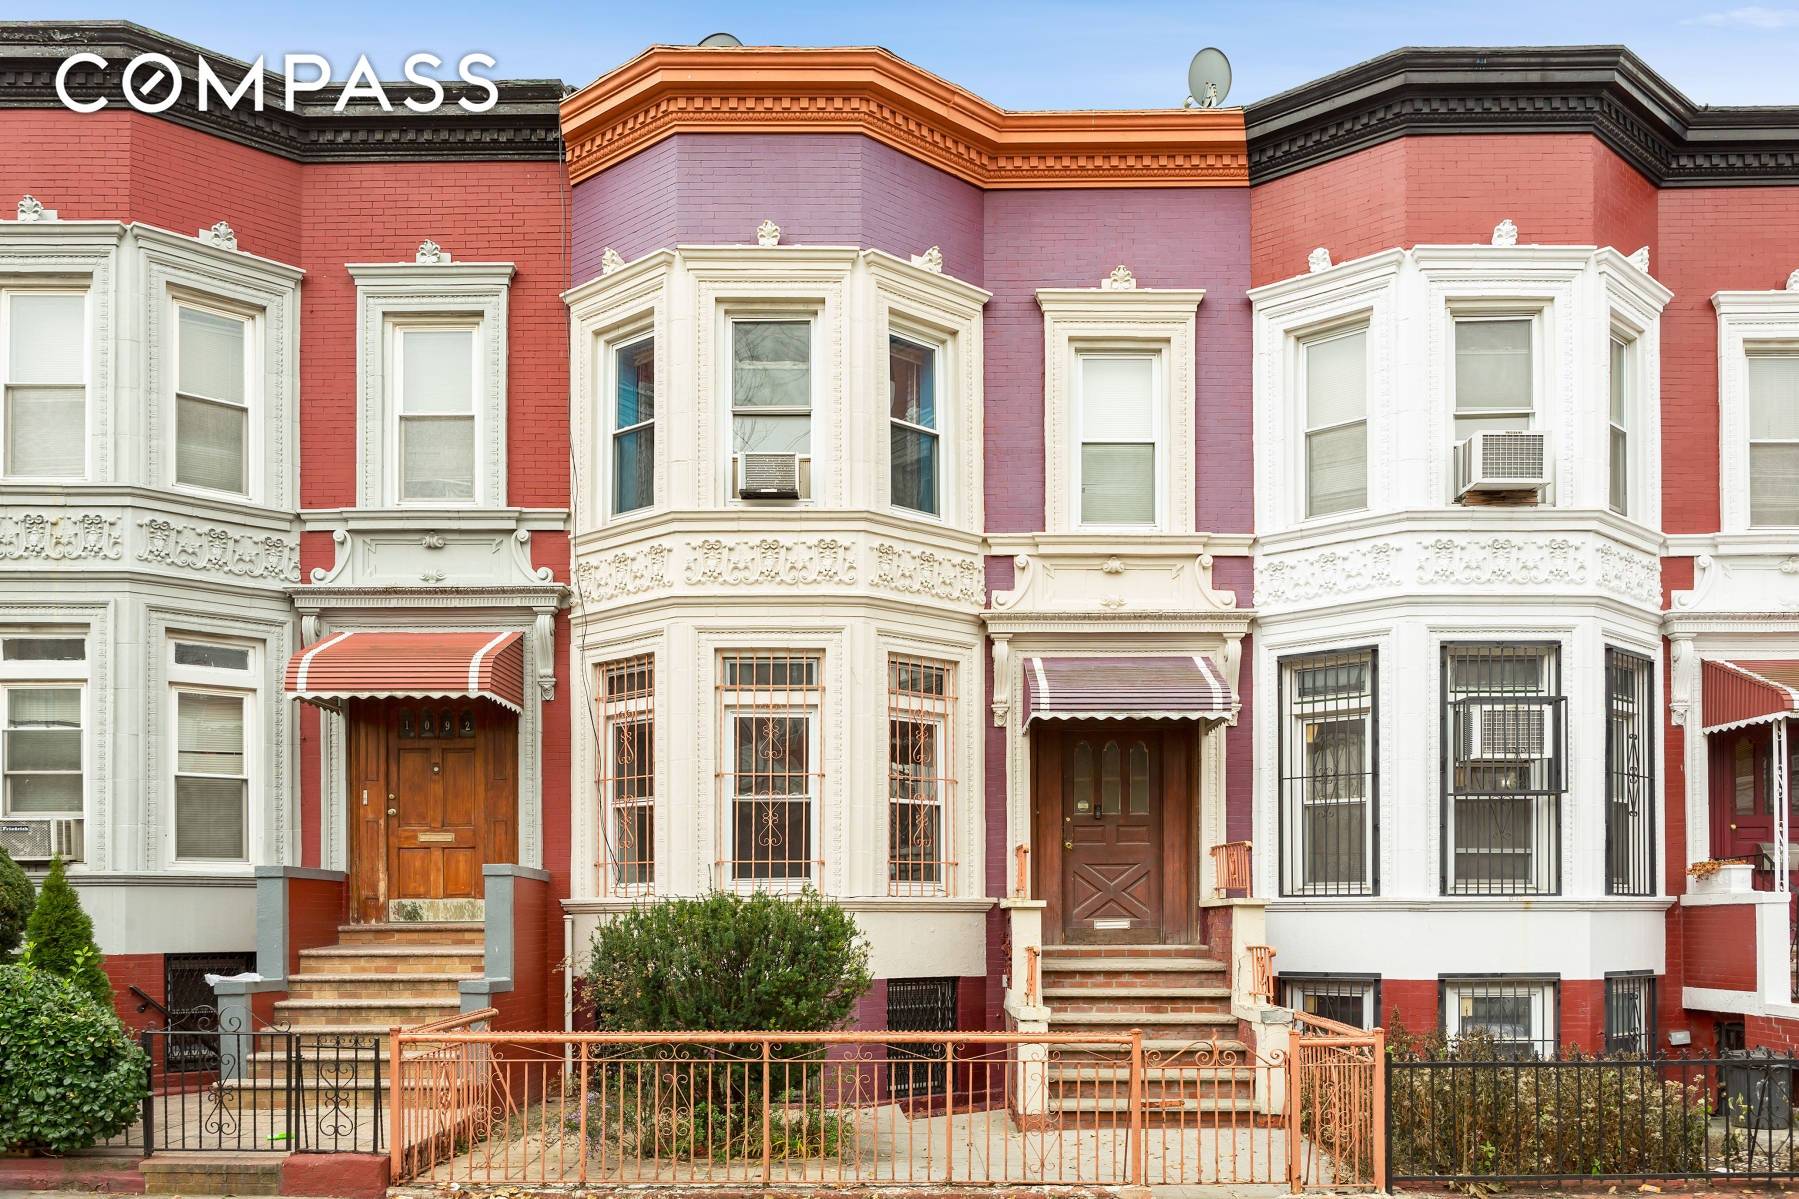 For the first time in 30 years, this beautiful Two Family brick townhouse is now for sale.